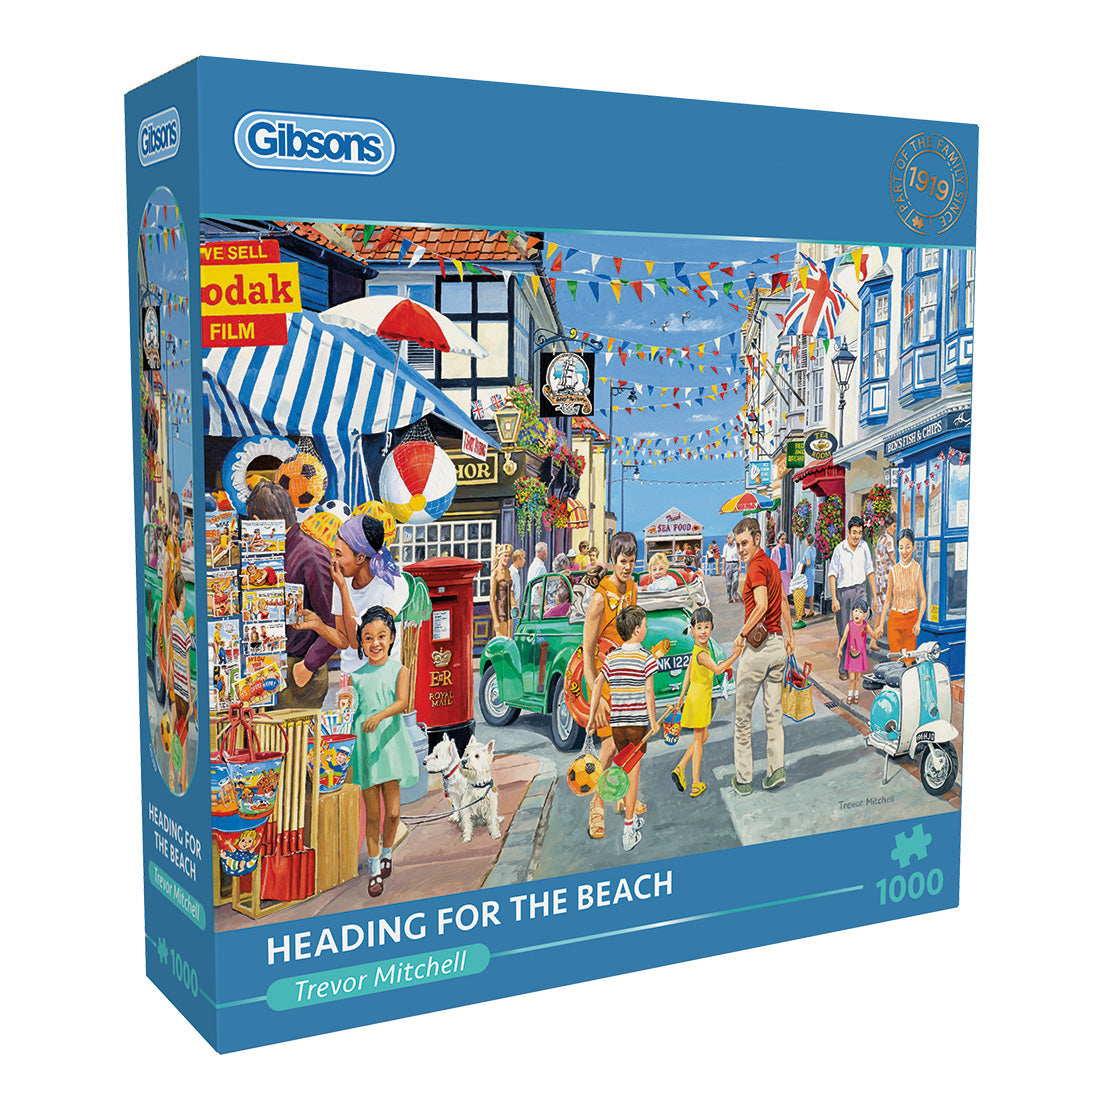 Gibsons - Heading for the Beach - 1000 Piece Jigsaw Puzzle